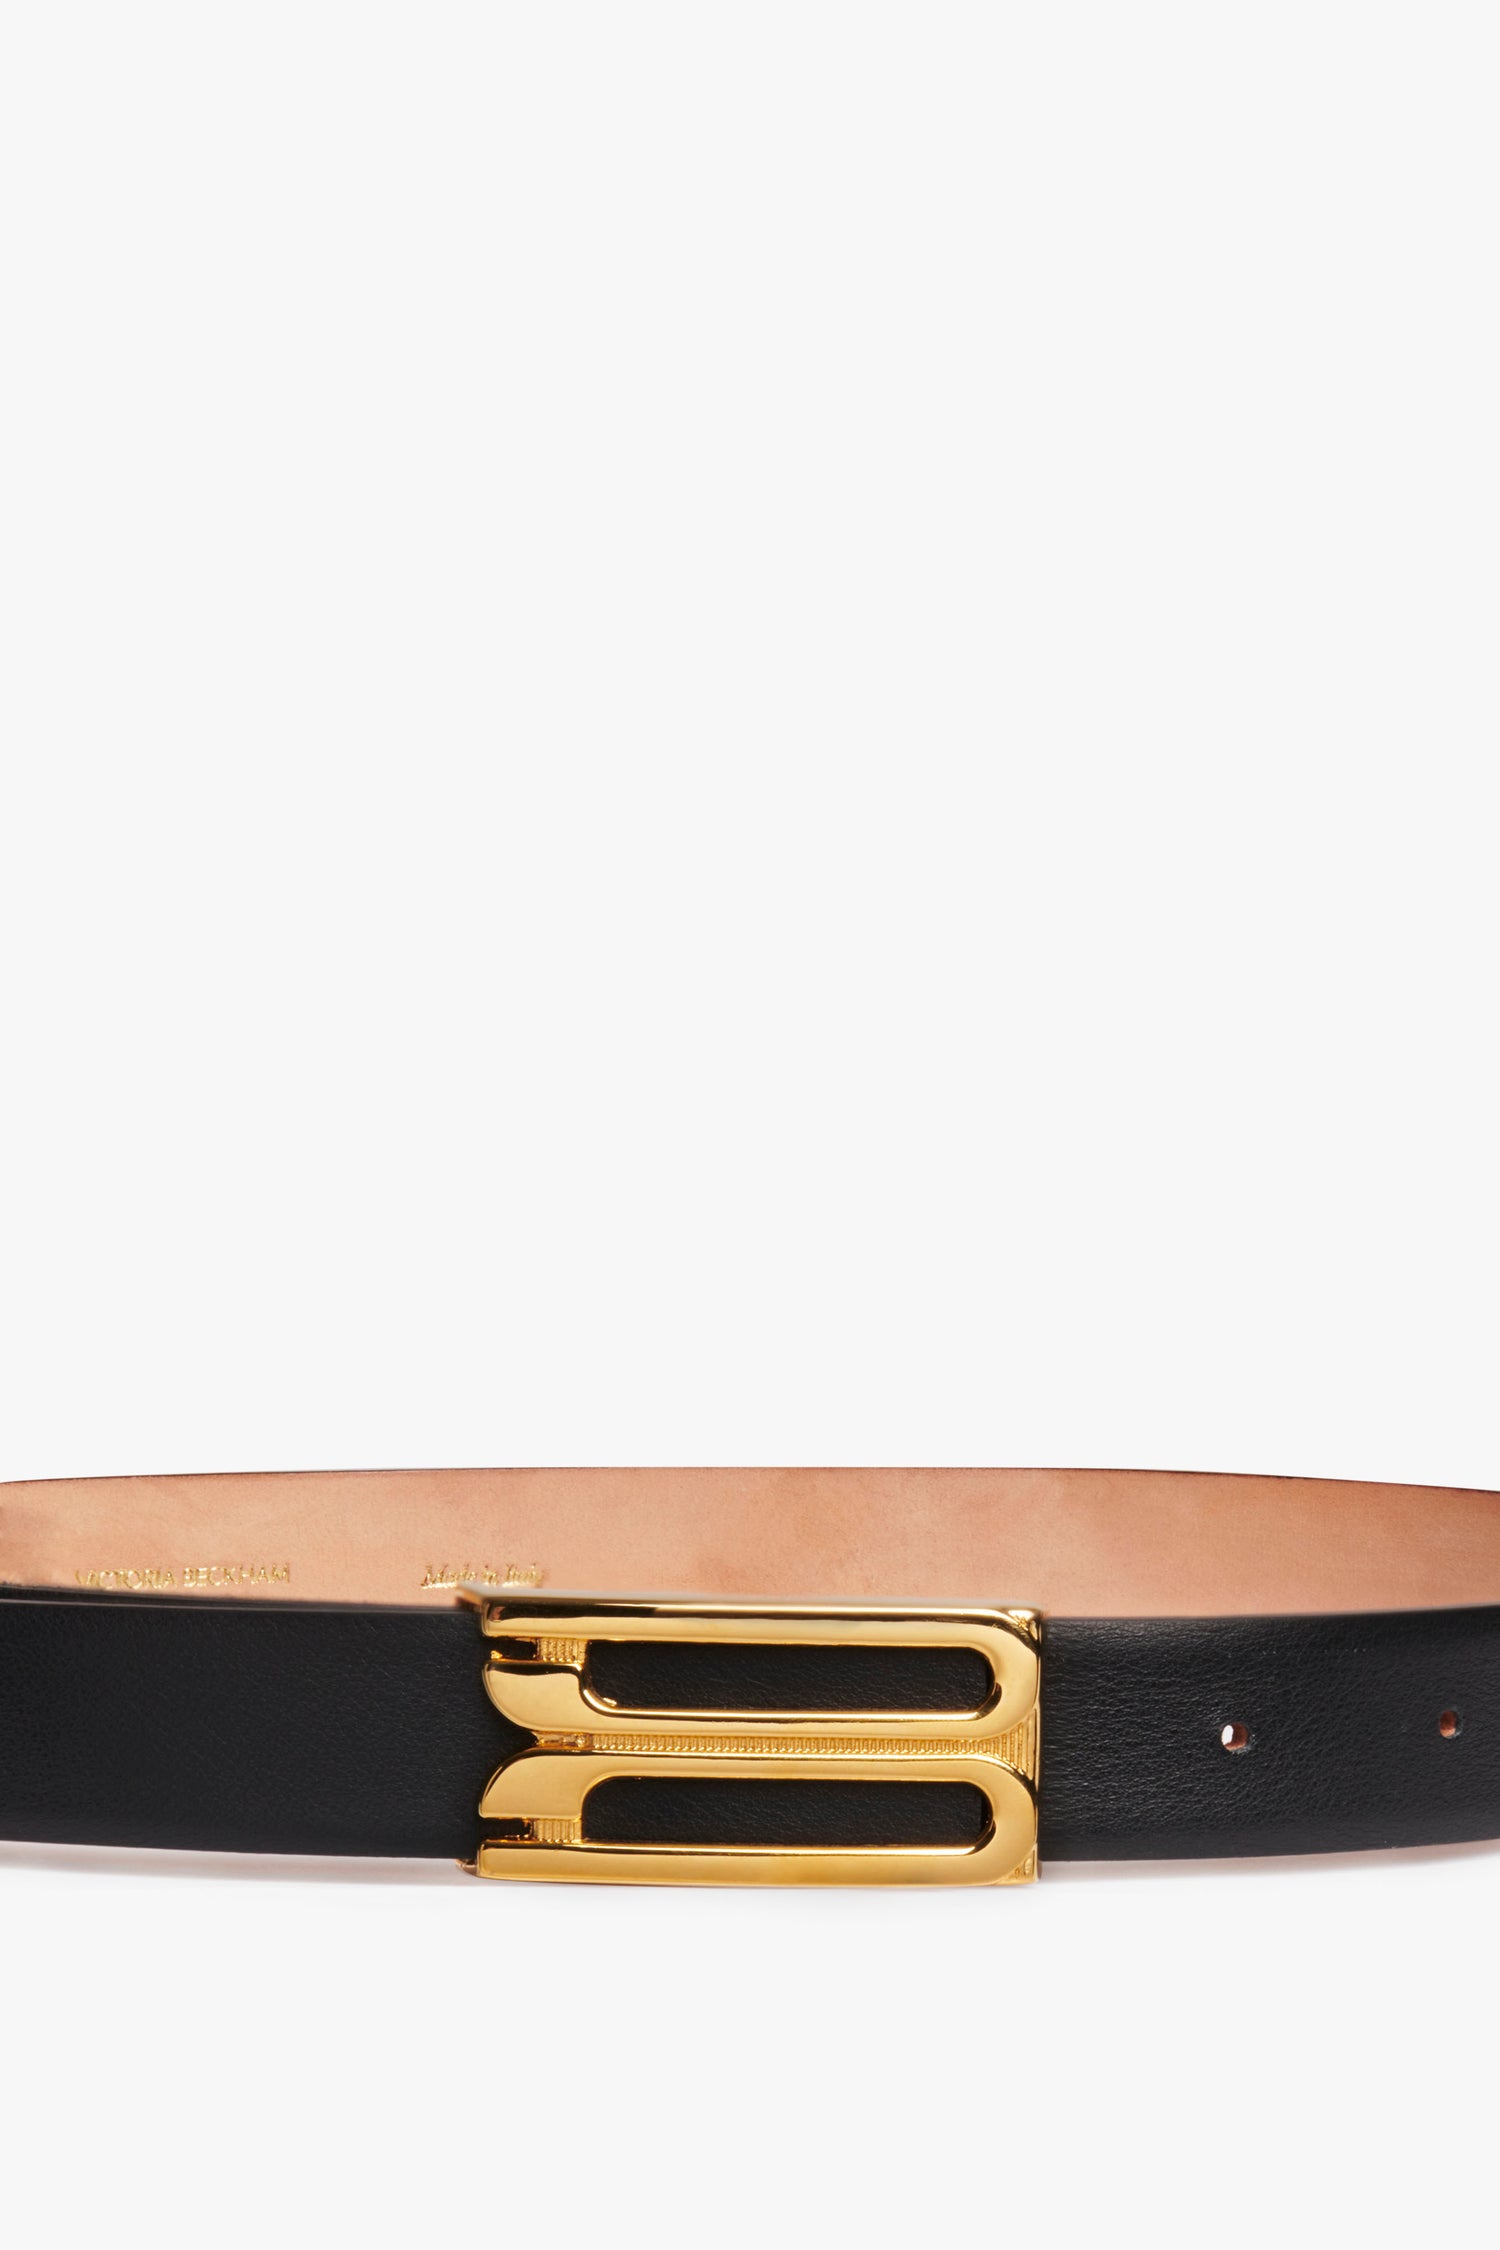 A Victoria Beckham black leather Frame Buckle Belt featuring a polished gold frame buckle, detailed with engraving, set against a white background.